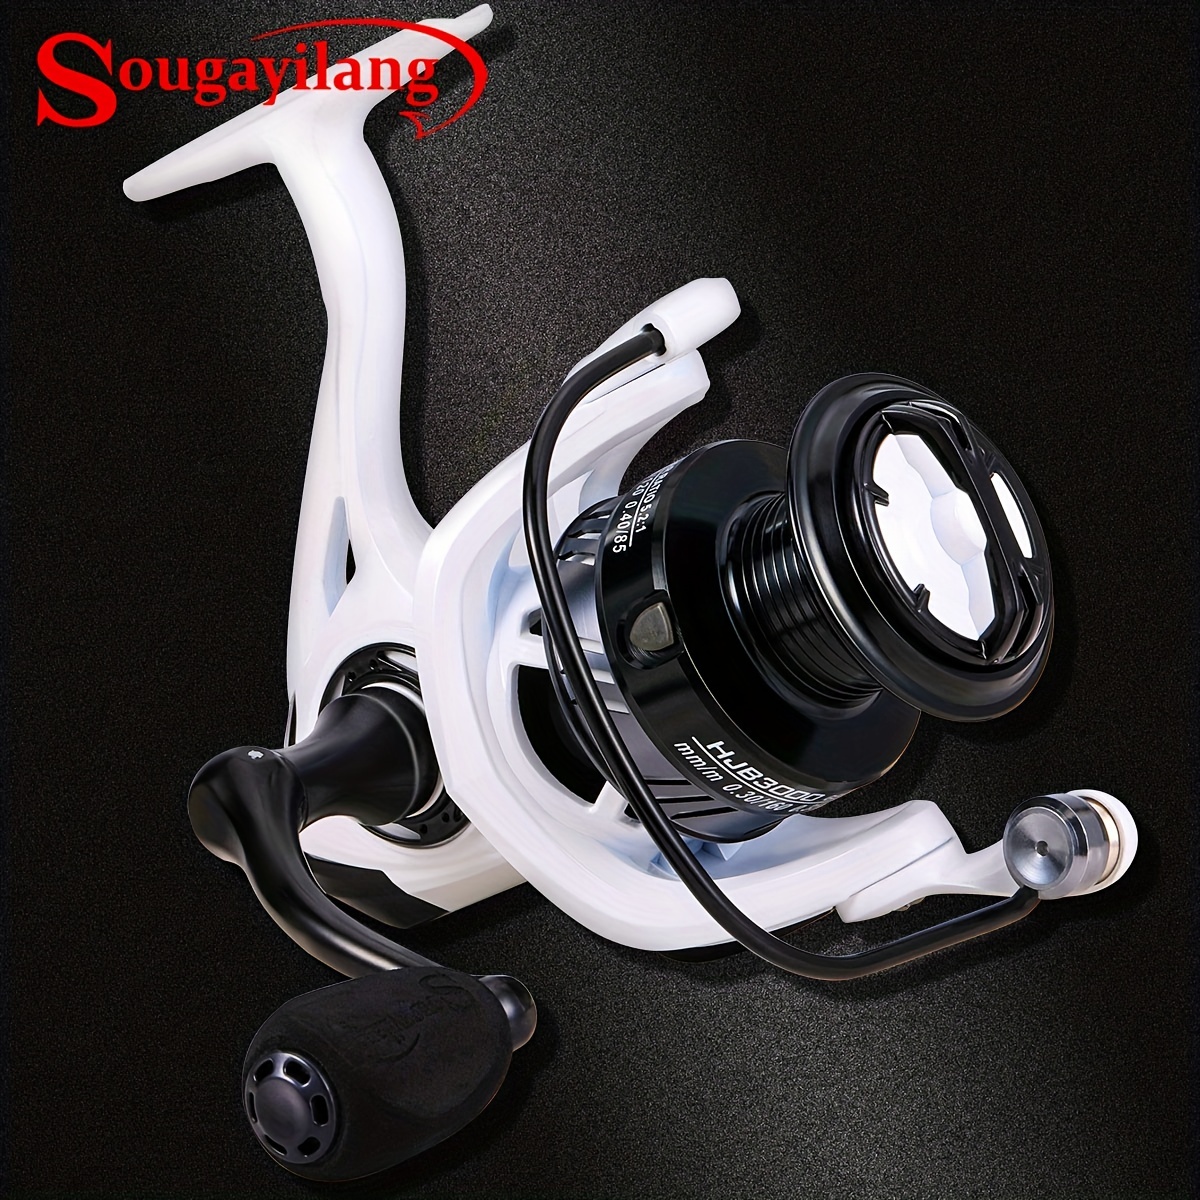 

Sougayilang 2000 3000 Series White 11+1bb Spinning Reel, 5.2:1 Gear Ratio Fishing Reel With Aluminum Spool For Freshwater Saltwater